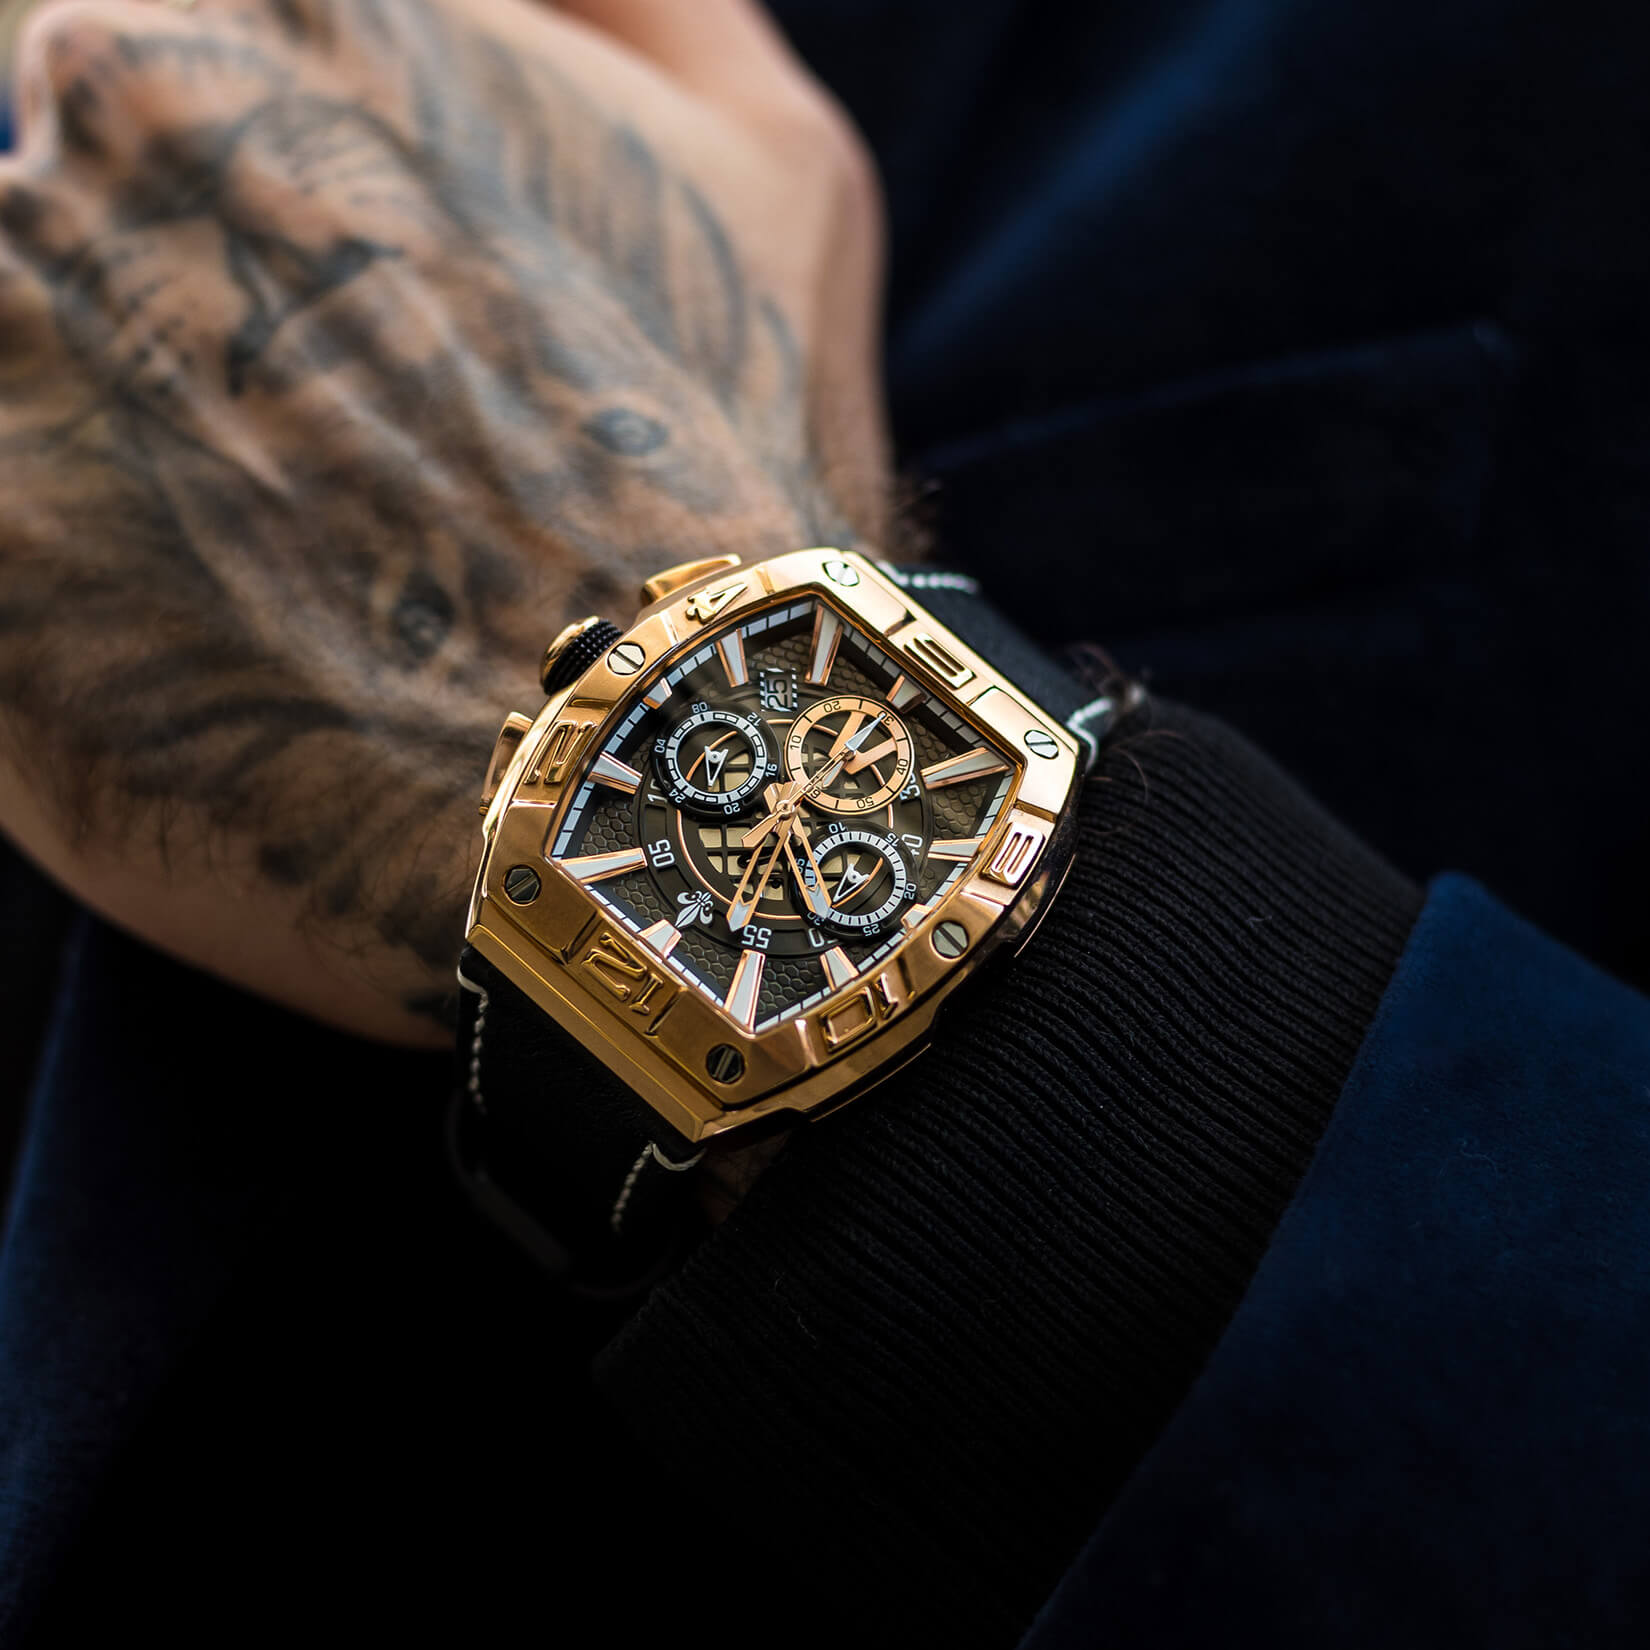 The Intrepid Chronograph - Rose Gold | Ralph Christian Watches